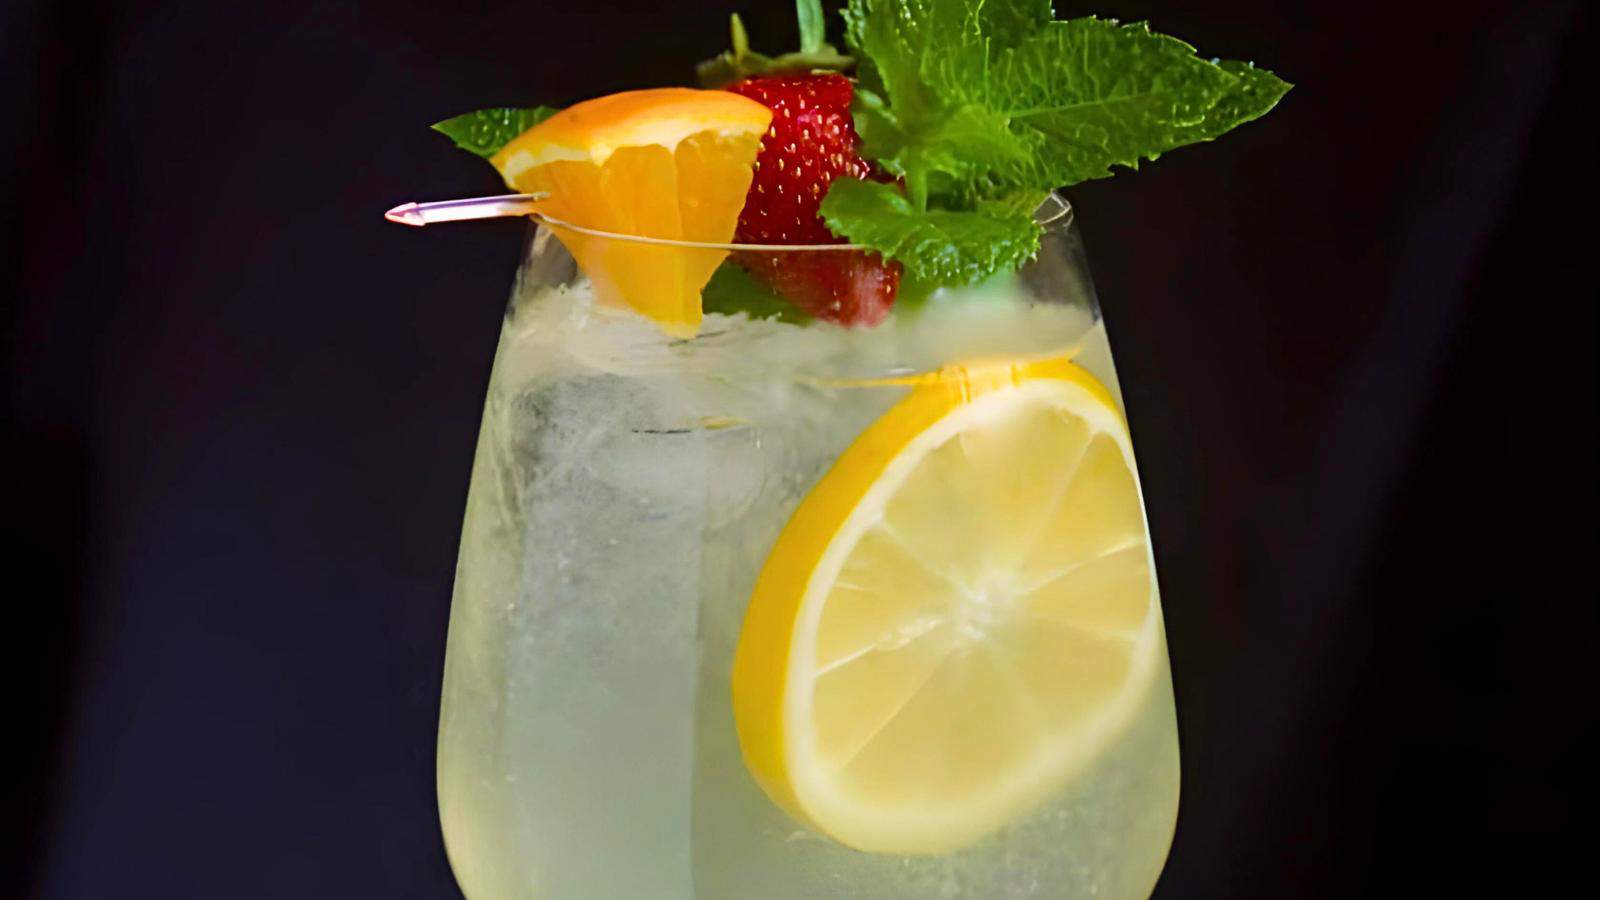 <p>A Limoncello Spritz is the ultimate summer refresher. This Italian favorite mixes limoncello, prosecco, and soda water for a bubbly, citrusy delight. It’s light, fizzy, and perfect for warm summer evenings.<br><strong>Get the Recipe: </strong><a href="https://www.christinascucina.com/limoncello-cocktail-italian-limoncello-spritz-recipe/?utm_source=msn&utm_medium=page&utm_campaign=msn" rel="noopener">Limoncello Spritz (Italian Limoncello Cocktail Recipe)</a></p>